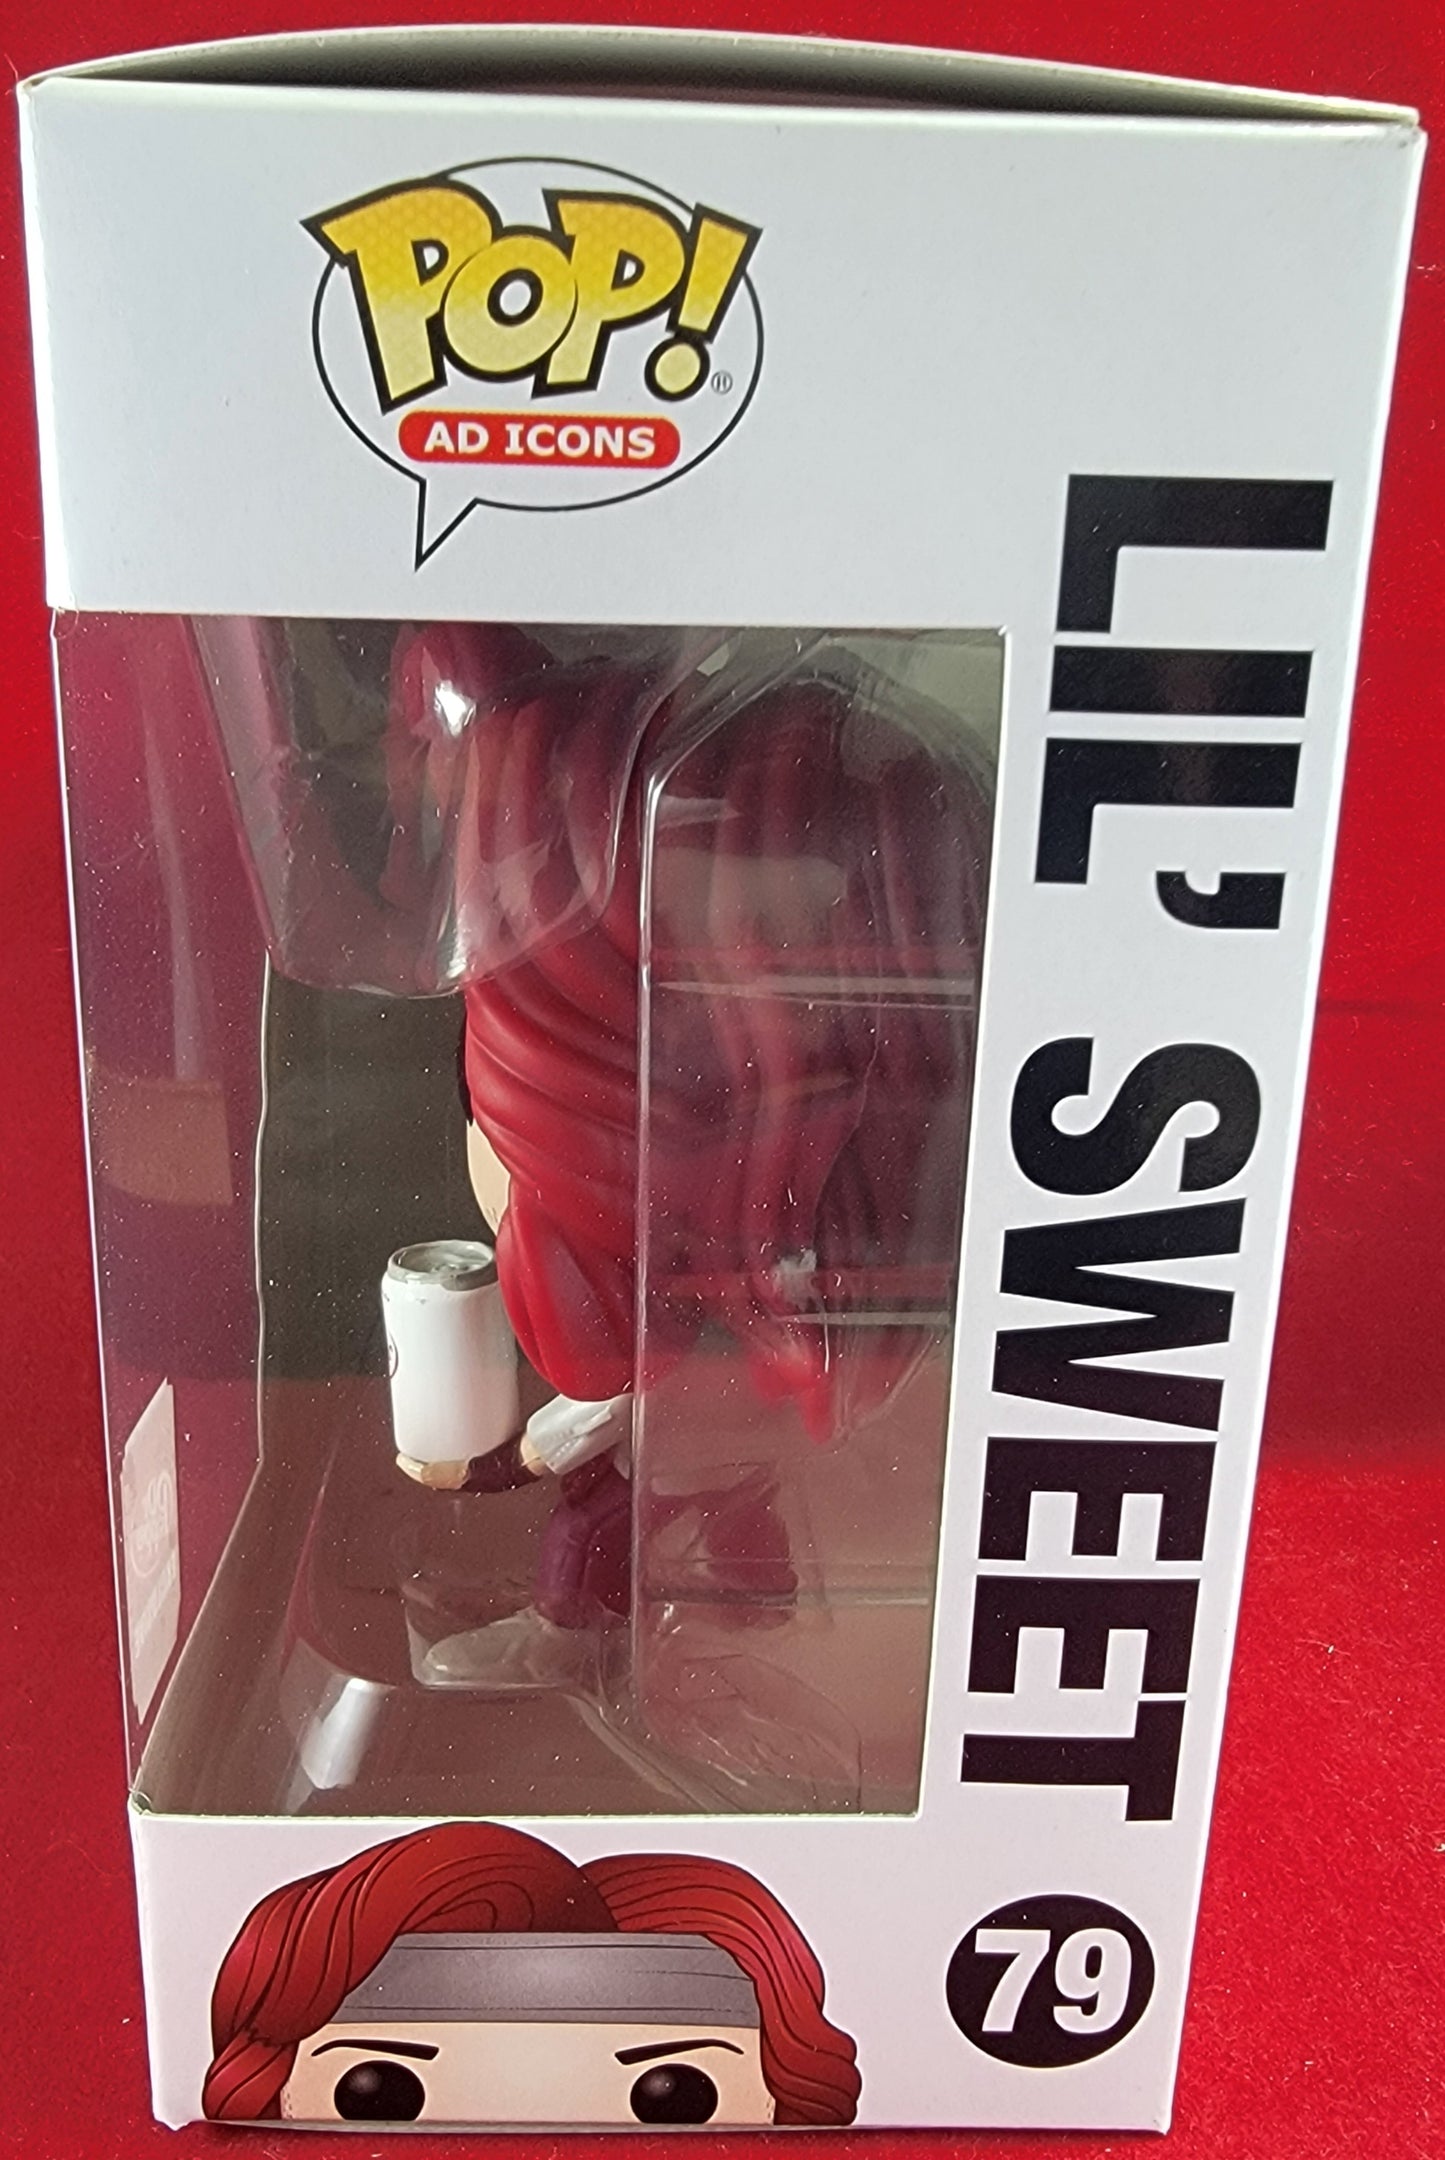 Lil' sweet, Dr. pepper exclusive funko # 79 (nib)
With pop protector